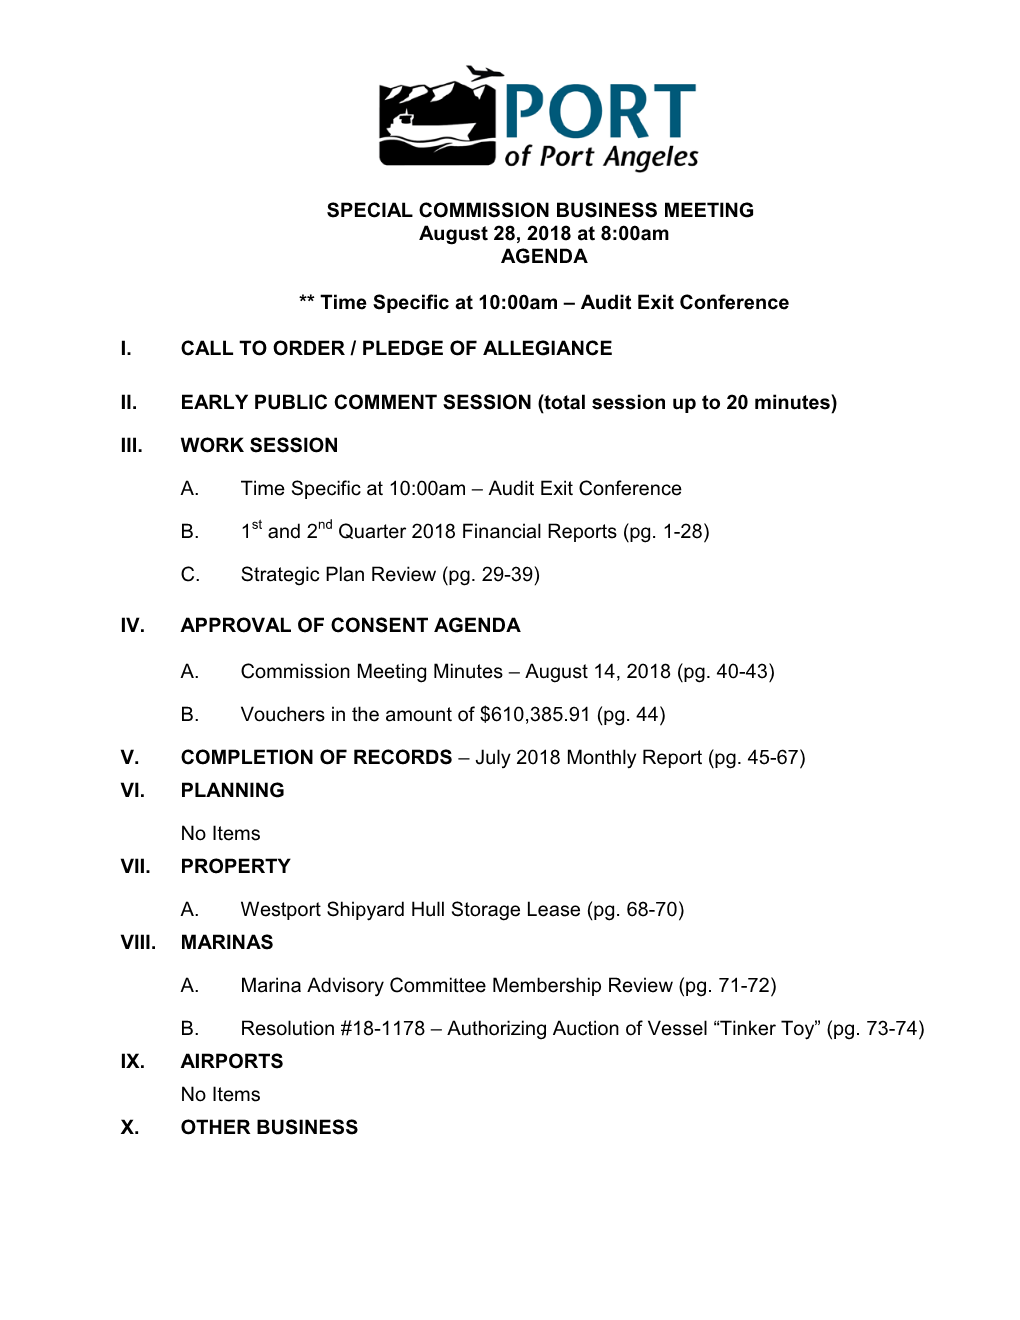 SPECIAL COMMISSION BUSINESS MEETING August 28, 2018 at 8:00Am AGENDA